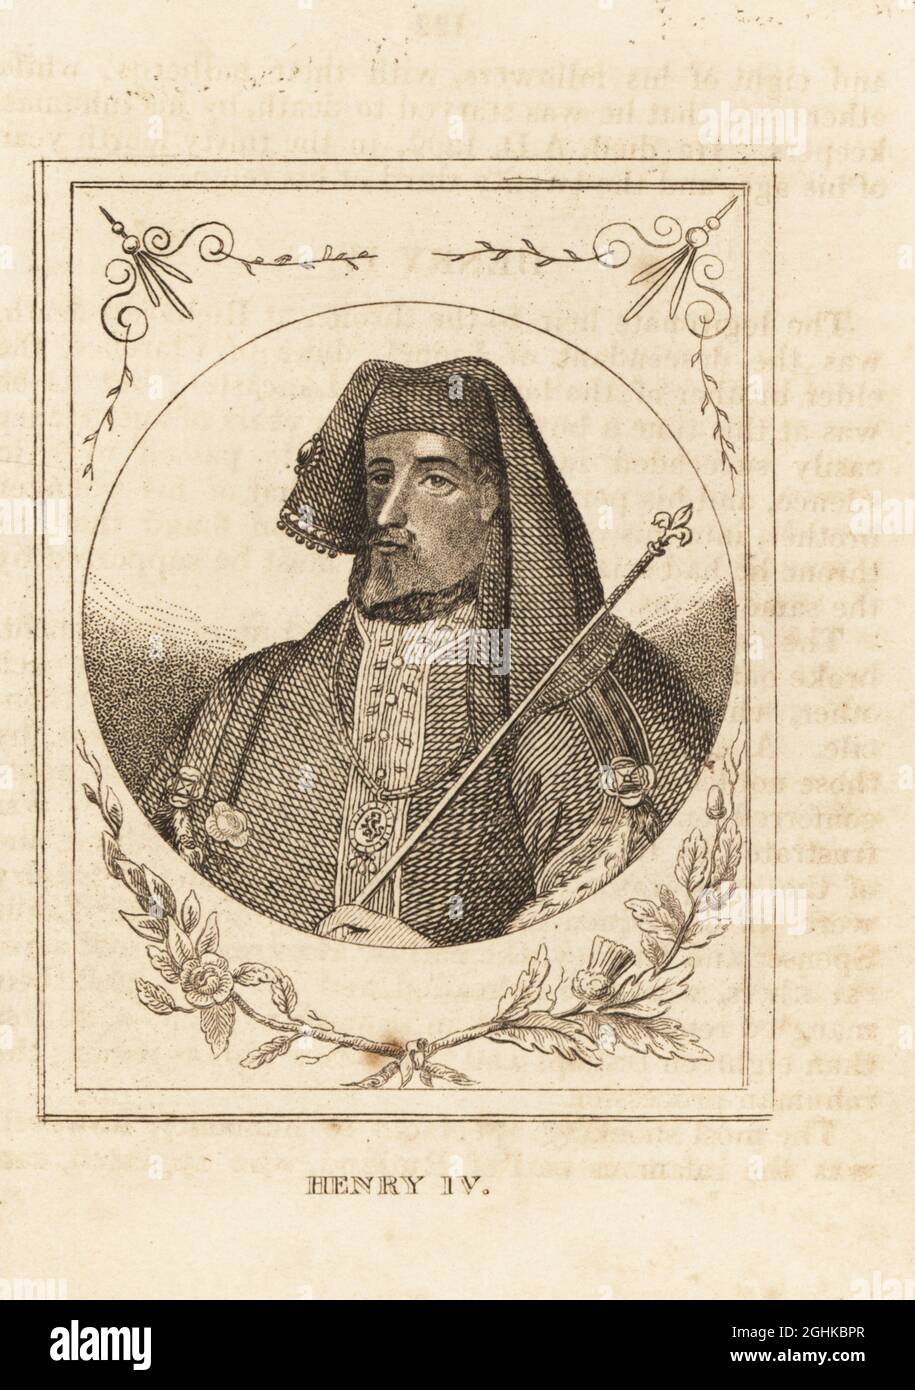 Portrait of King Henry IV of England, 1367-1413. In bejewelled hat, ermine-lined mantle, holding a sceptre. Copperplate engraving from M. A. Jones’ History of England from Julius Caesar to George IV, G. Virtue, 26 Ivy Lane, London, 1836. Stock Photo